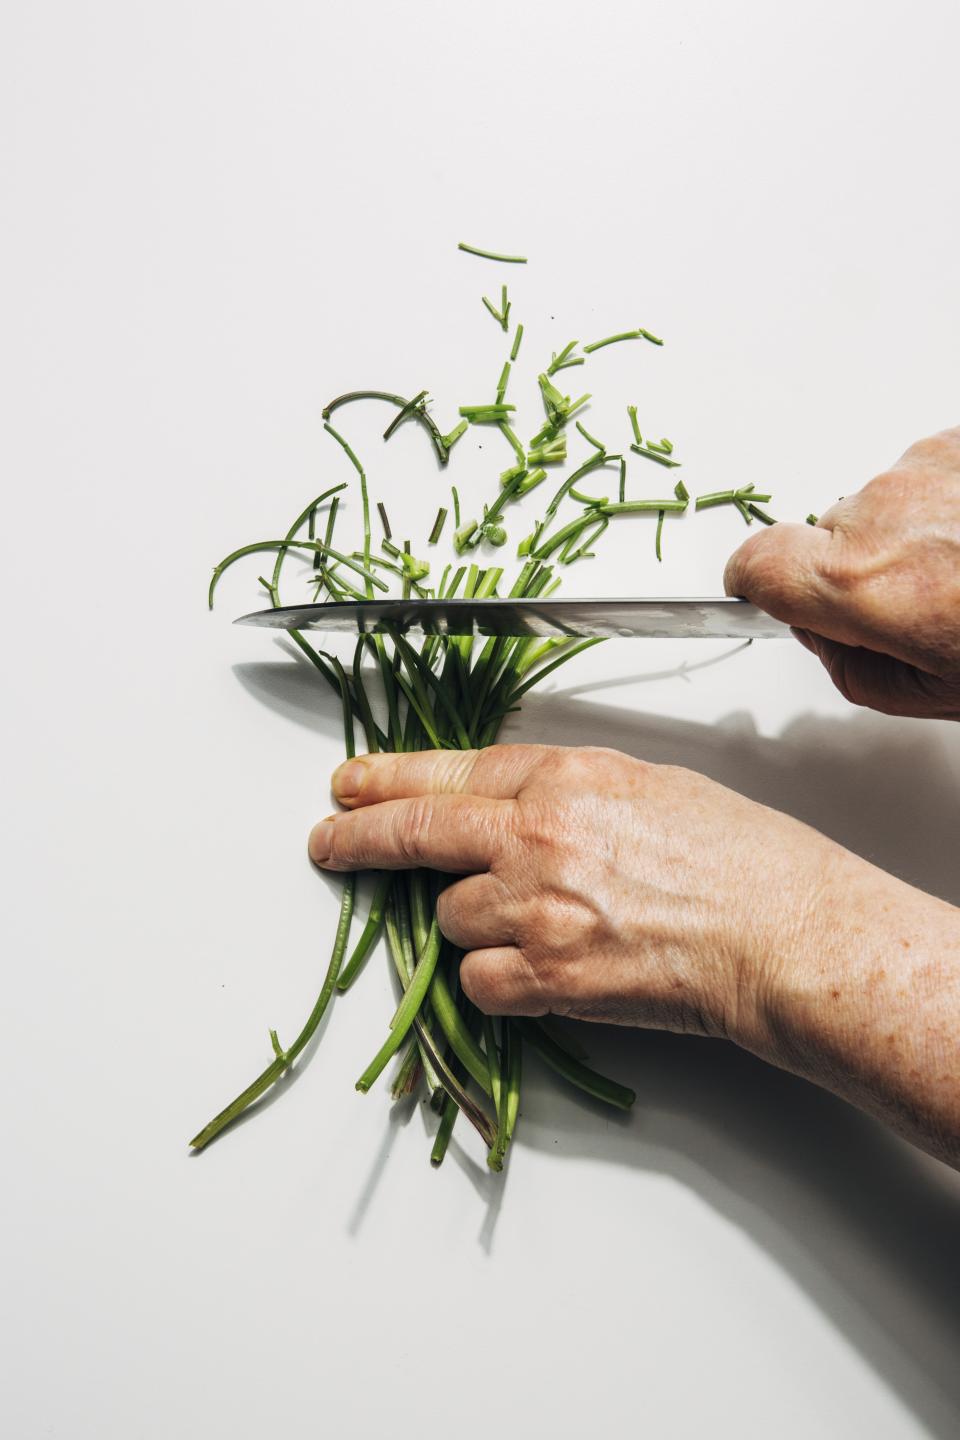 How to Use the Herb Stems You Definitely Shouldn't Be Throwing Away